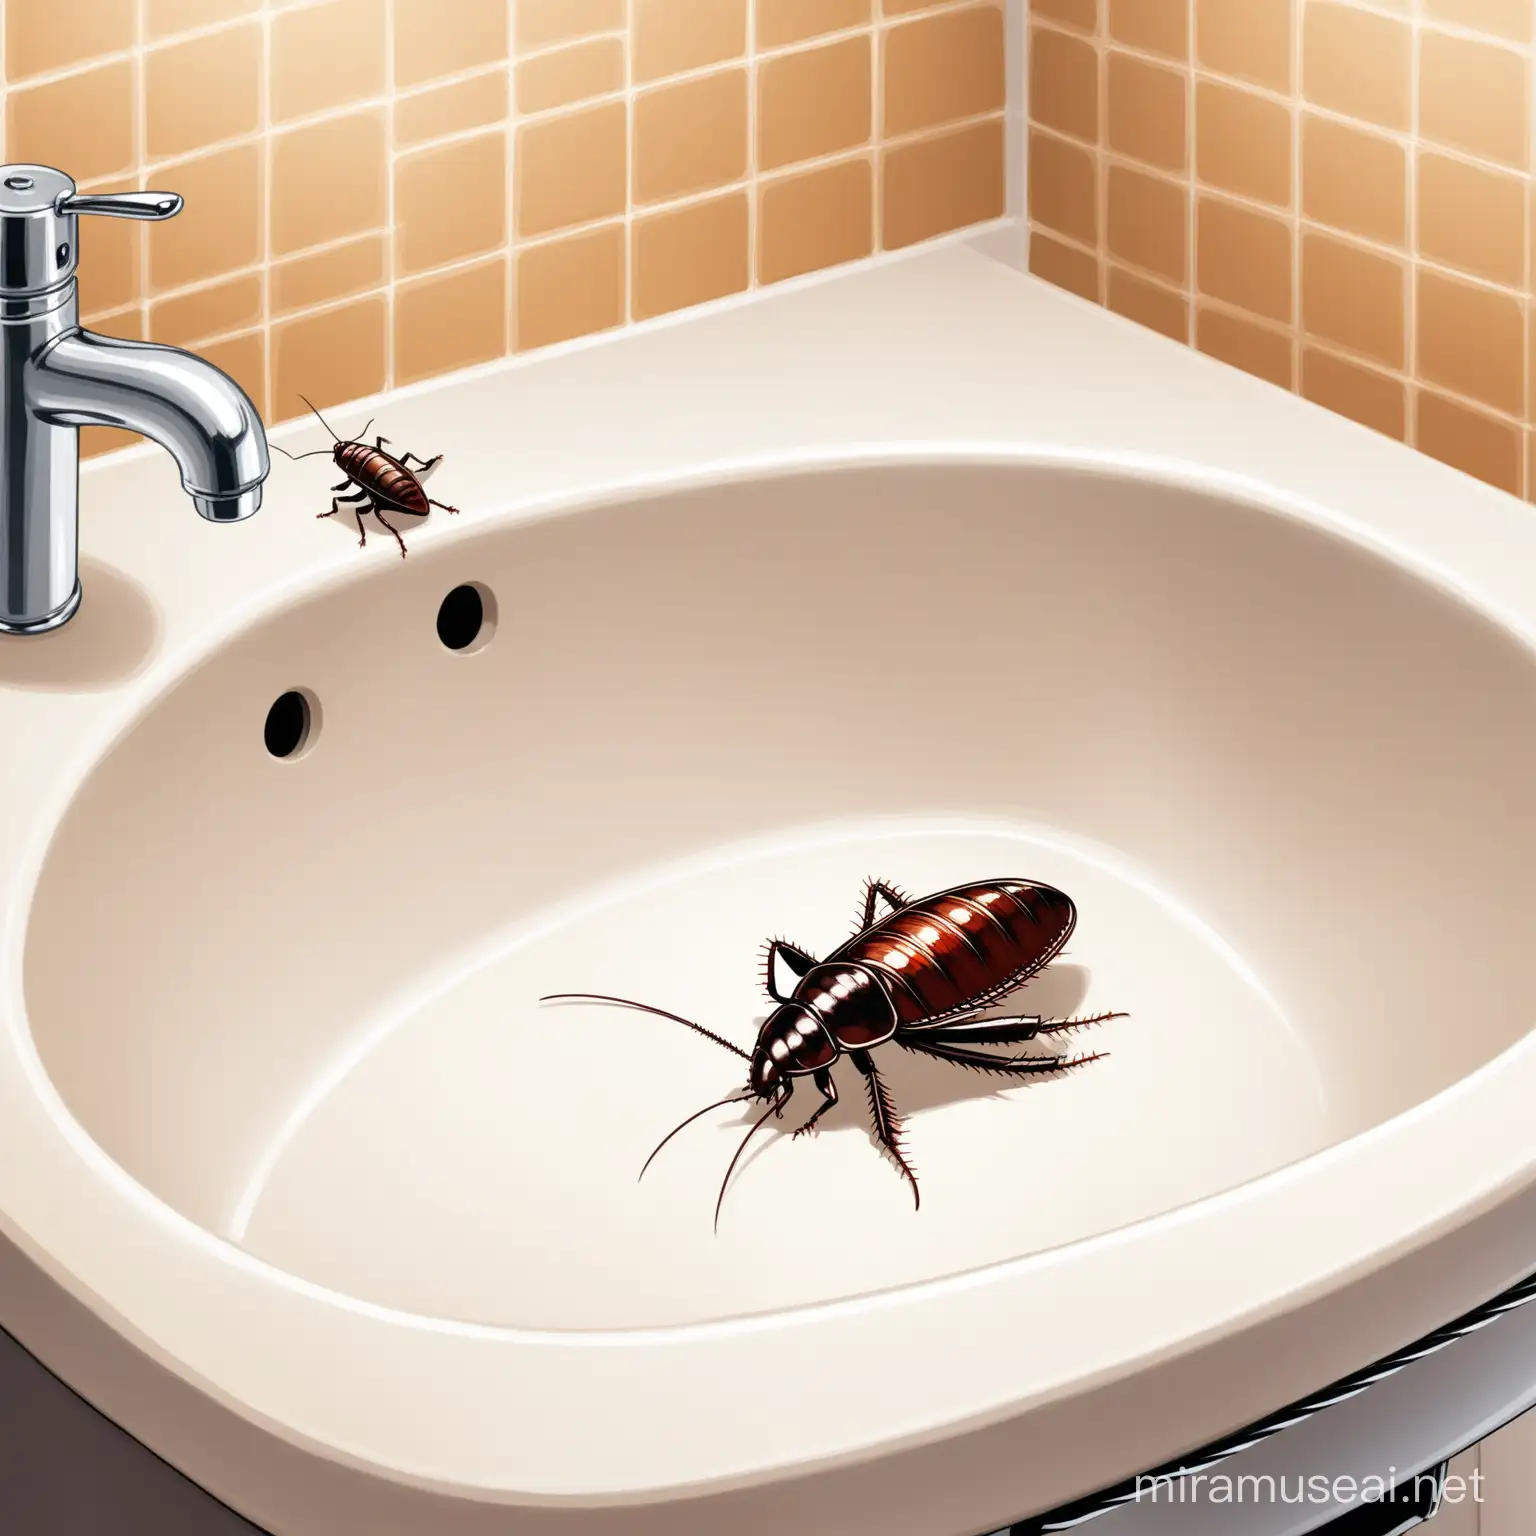 Woman Discovering Cockroach in Bathroom Sink Overcoming Fear and Surprise